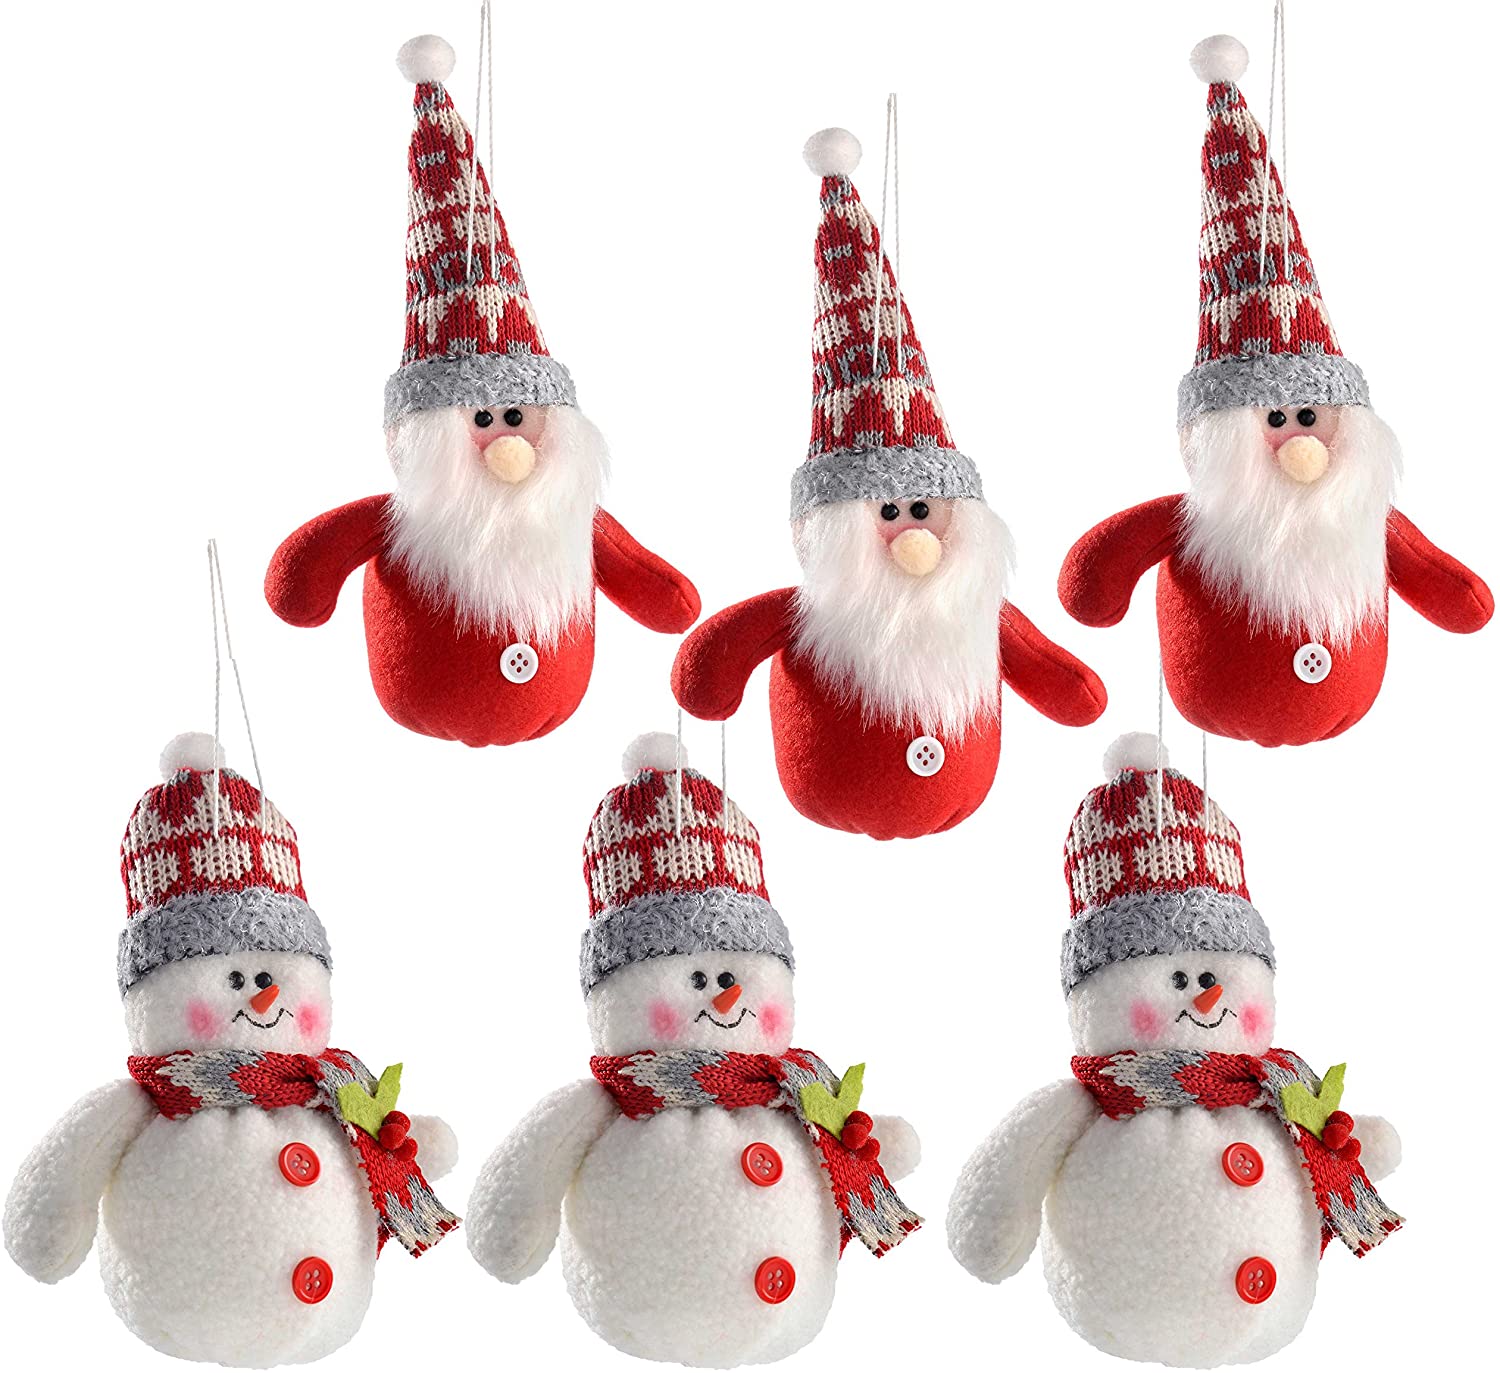 WeRChristmas 15 cm Hanging Santa and Snowman Christmas Decoration, Red/White (6 Pieces)